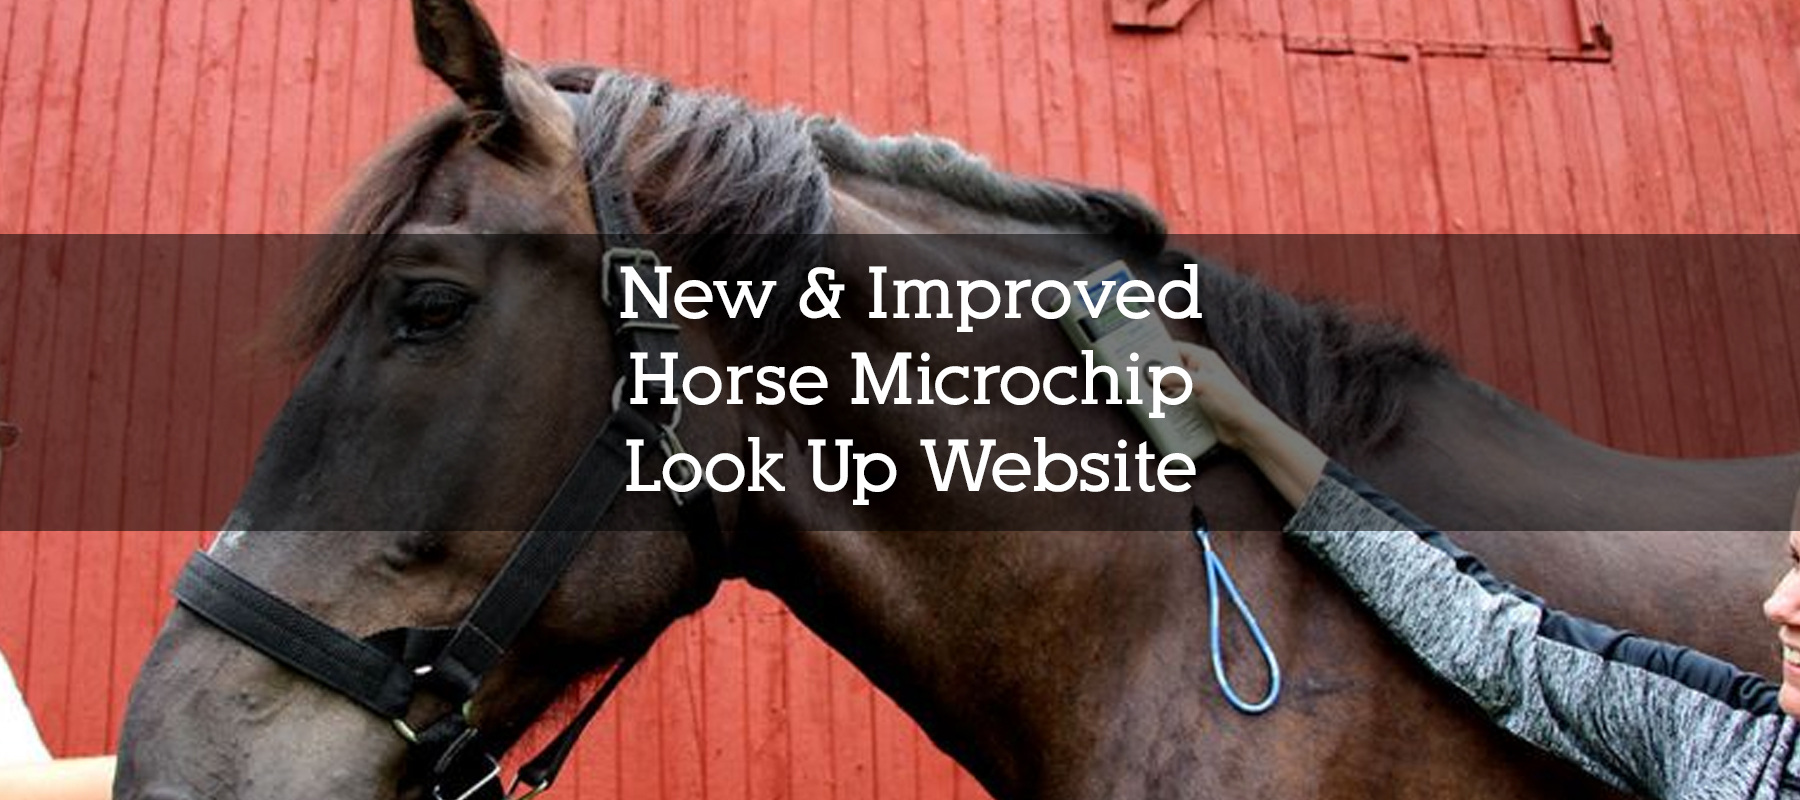 New & Improved Horse Microchip Look Up Website